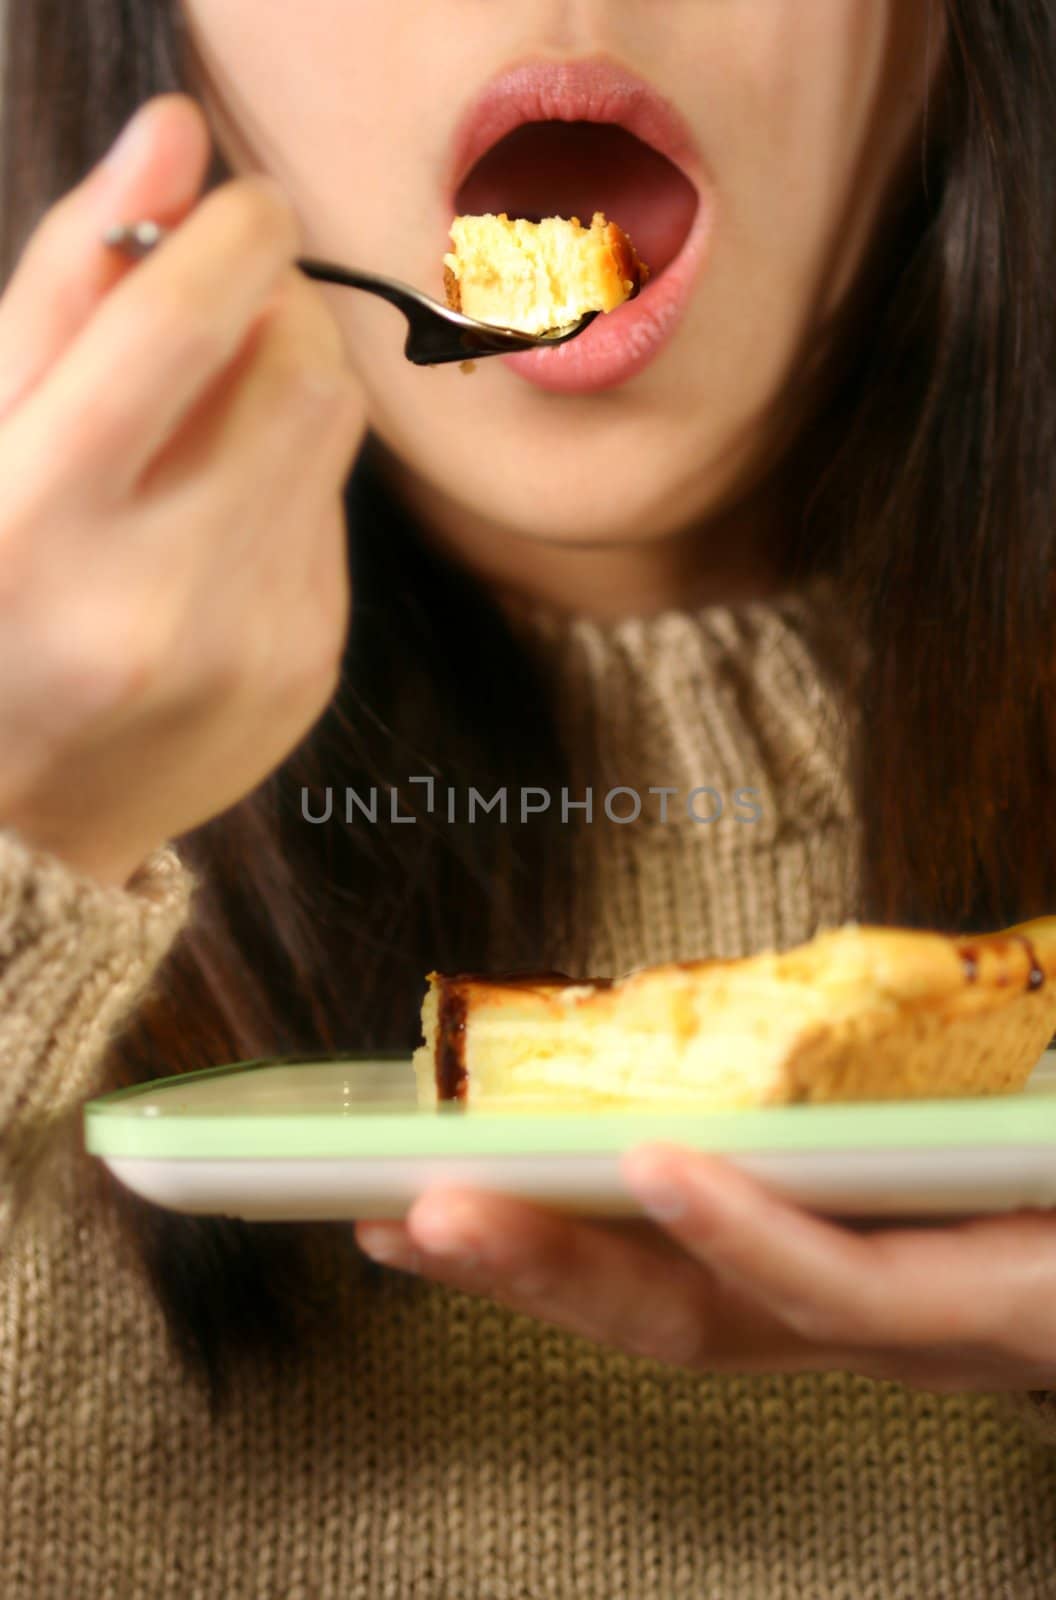 A woman eating a piece of cheese cake